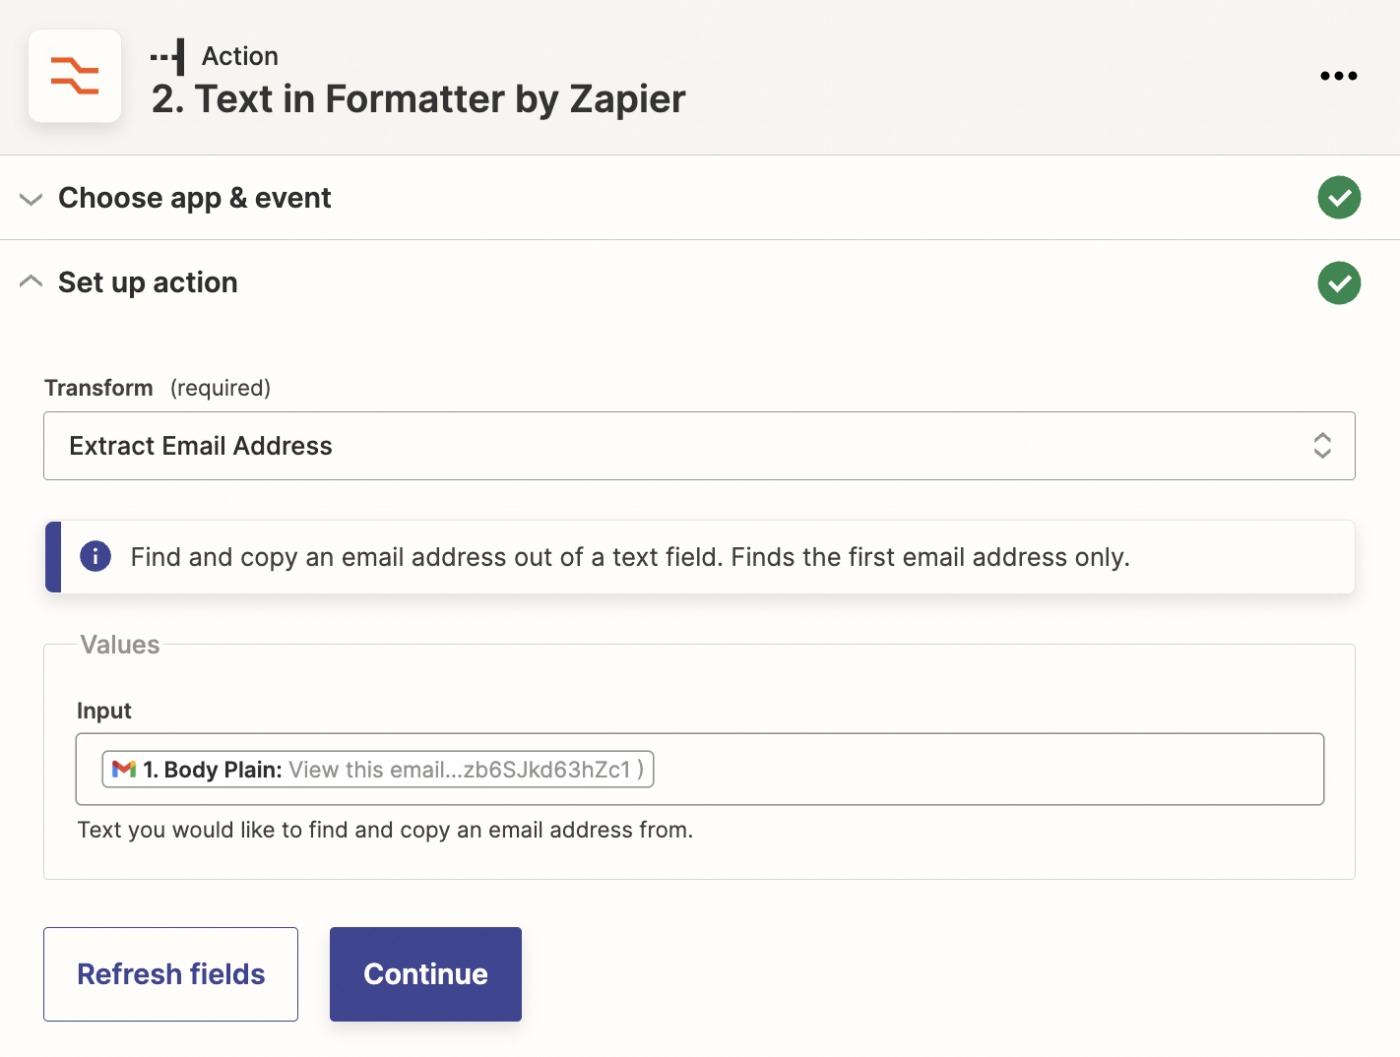 Zapier Formatter can automatically extract emails, links, and numbers anytime something new is added to your apps.